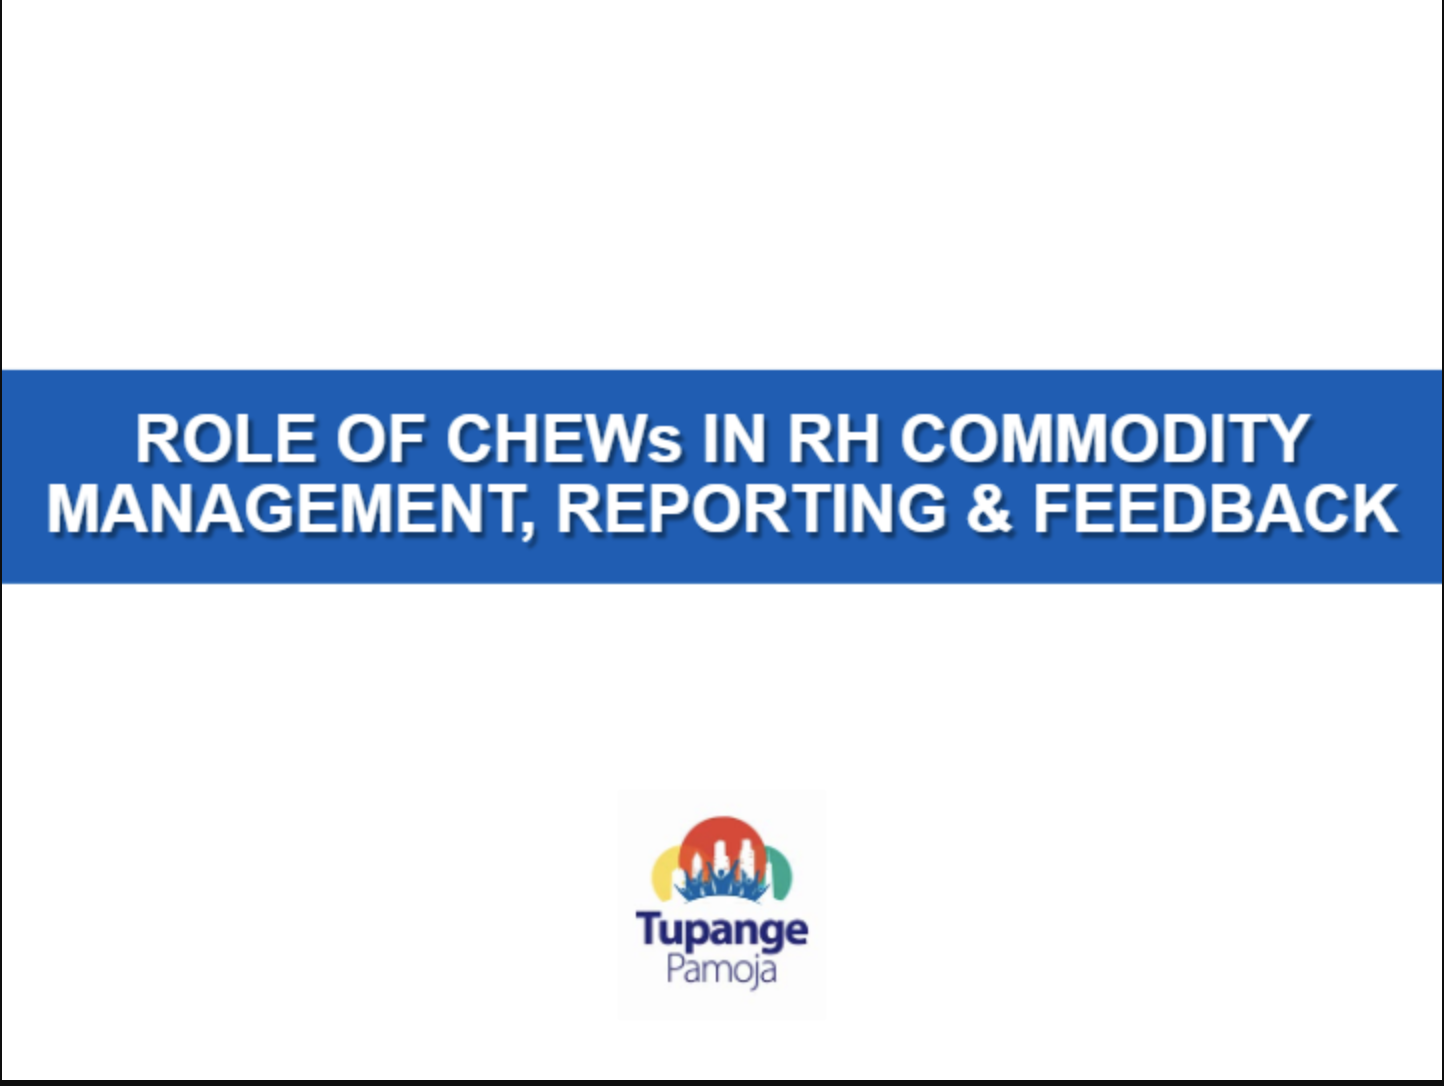 Role of CHEWs in Reproductive Health Commodity Management